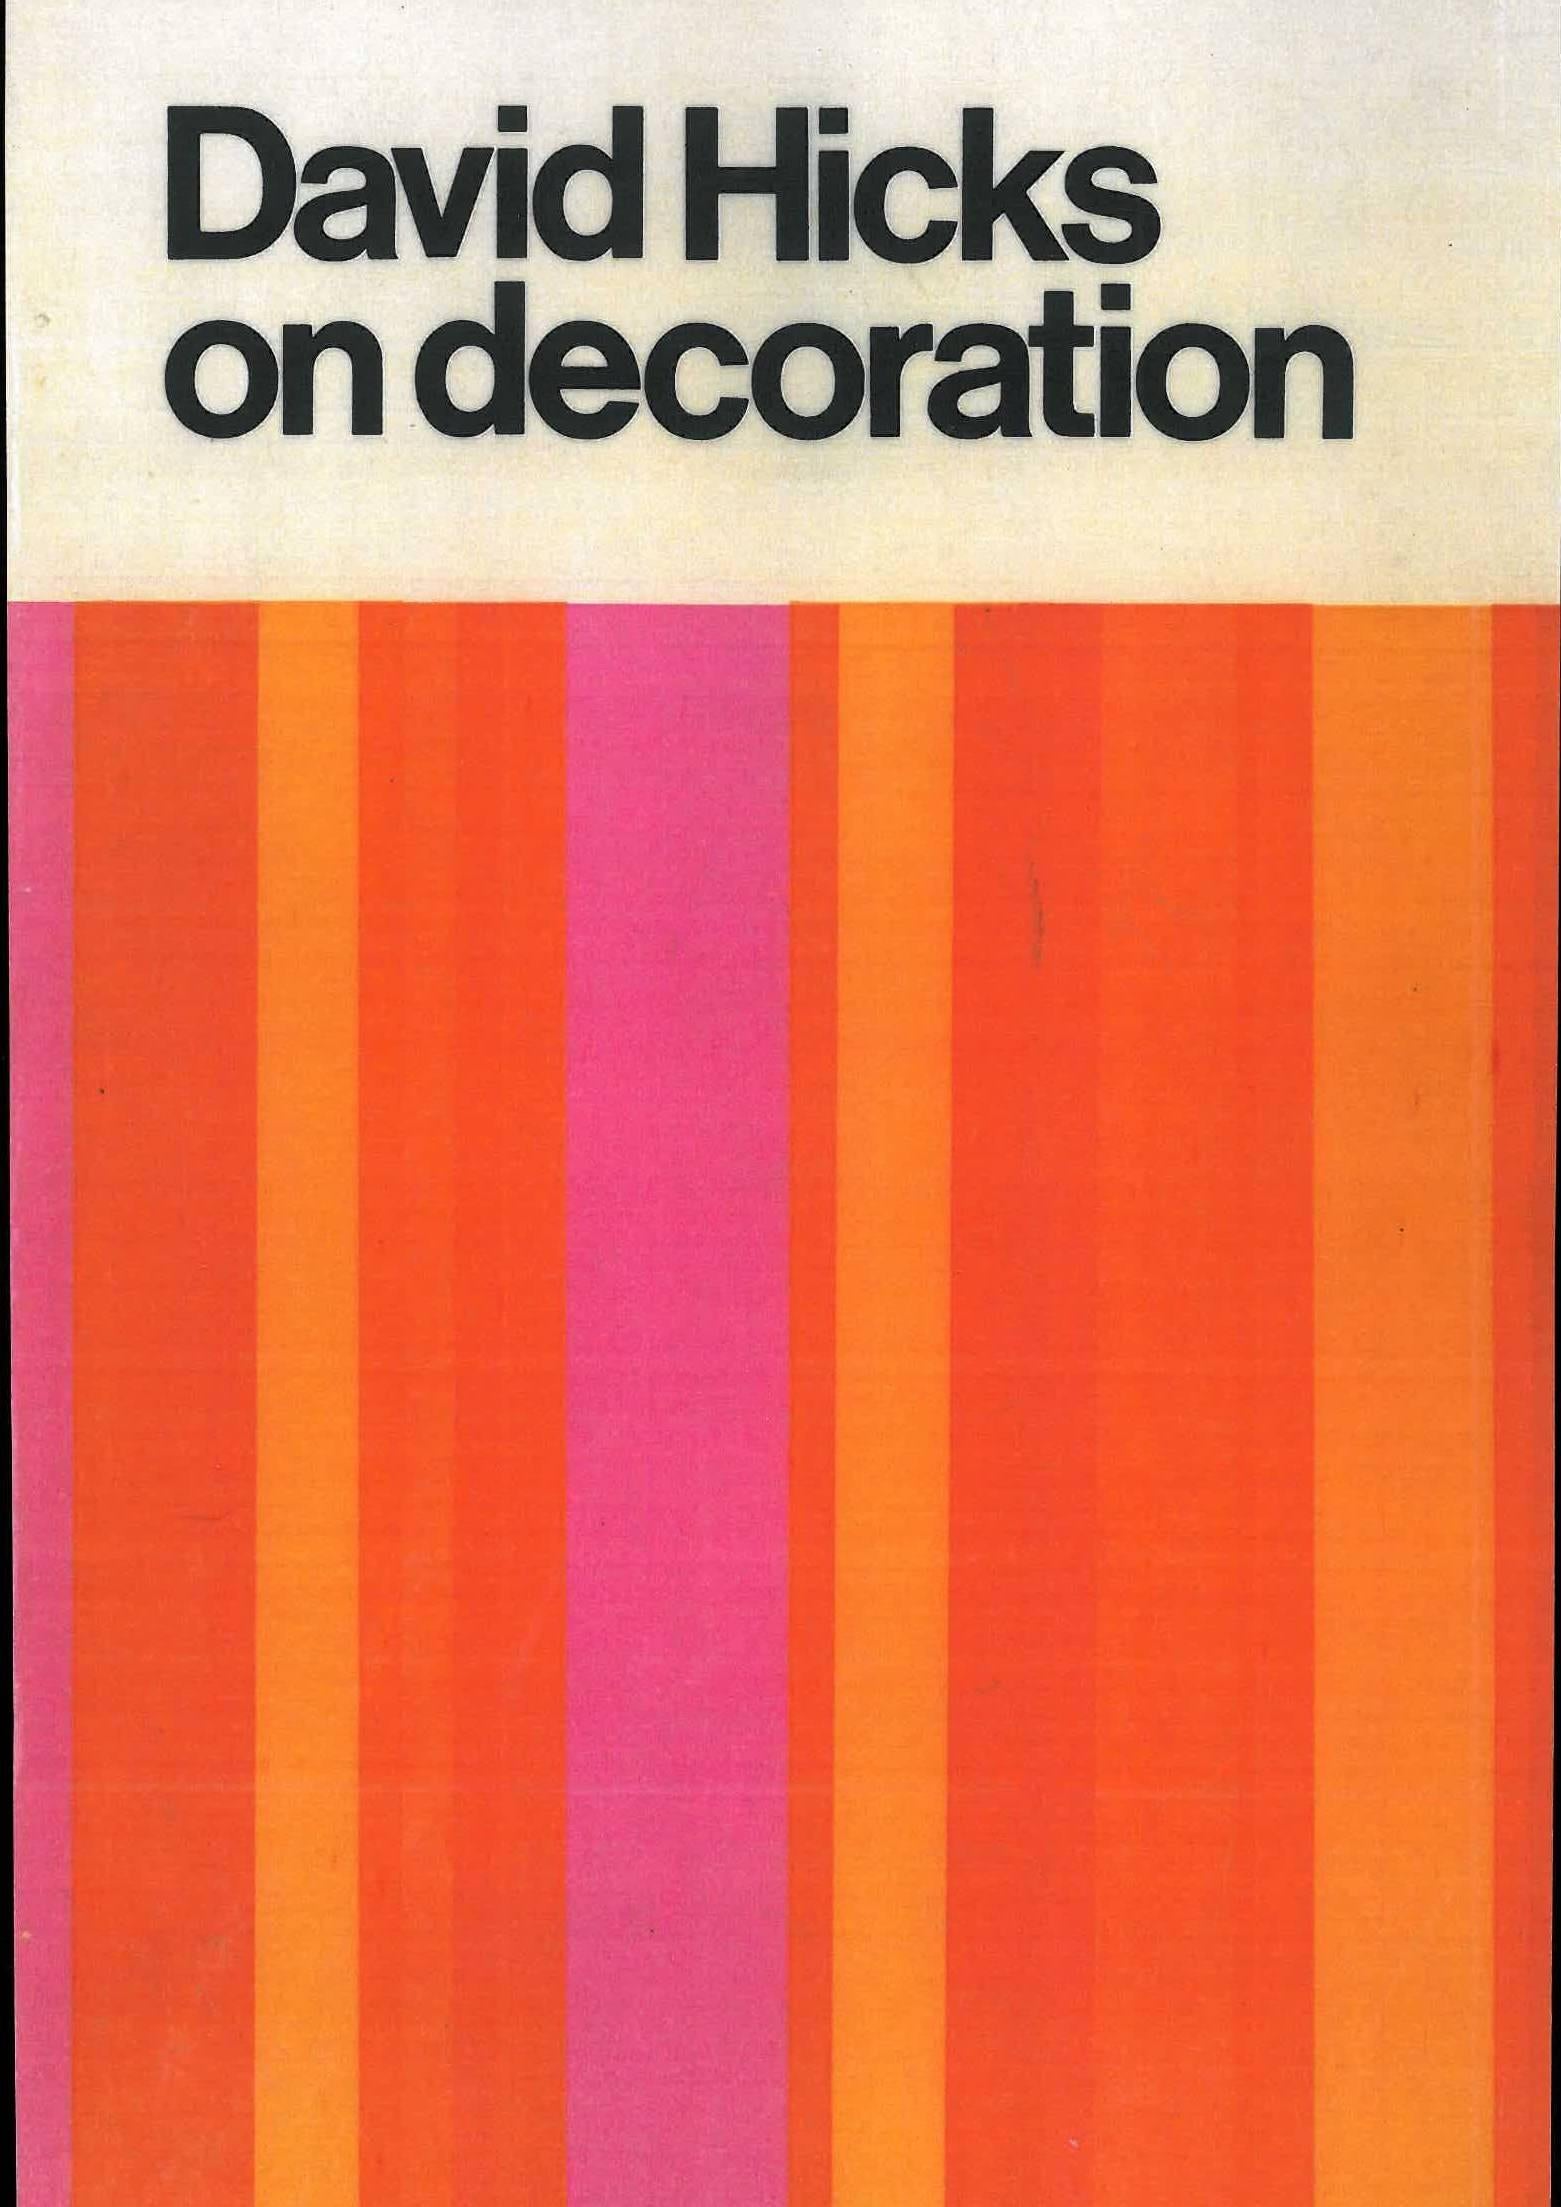 This is a good set of five 1st editions of David Hicks books on interior design and decoration. They are a combination of the English and American 1st editions.
1. David Hicks on decoration.
2. David Hicks on living with taste.
3. David Hicks on